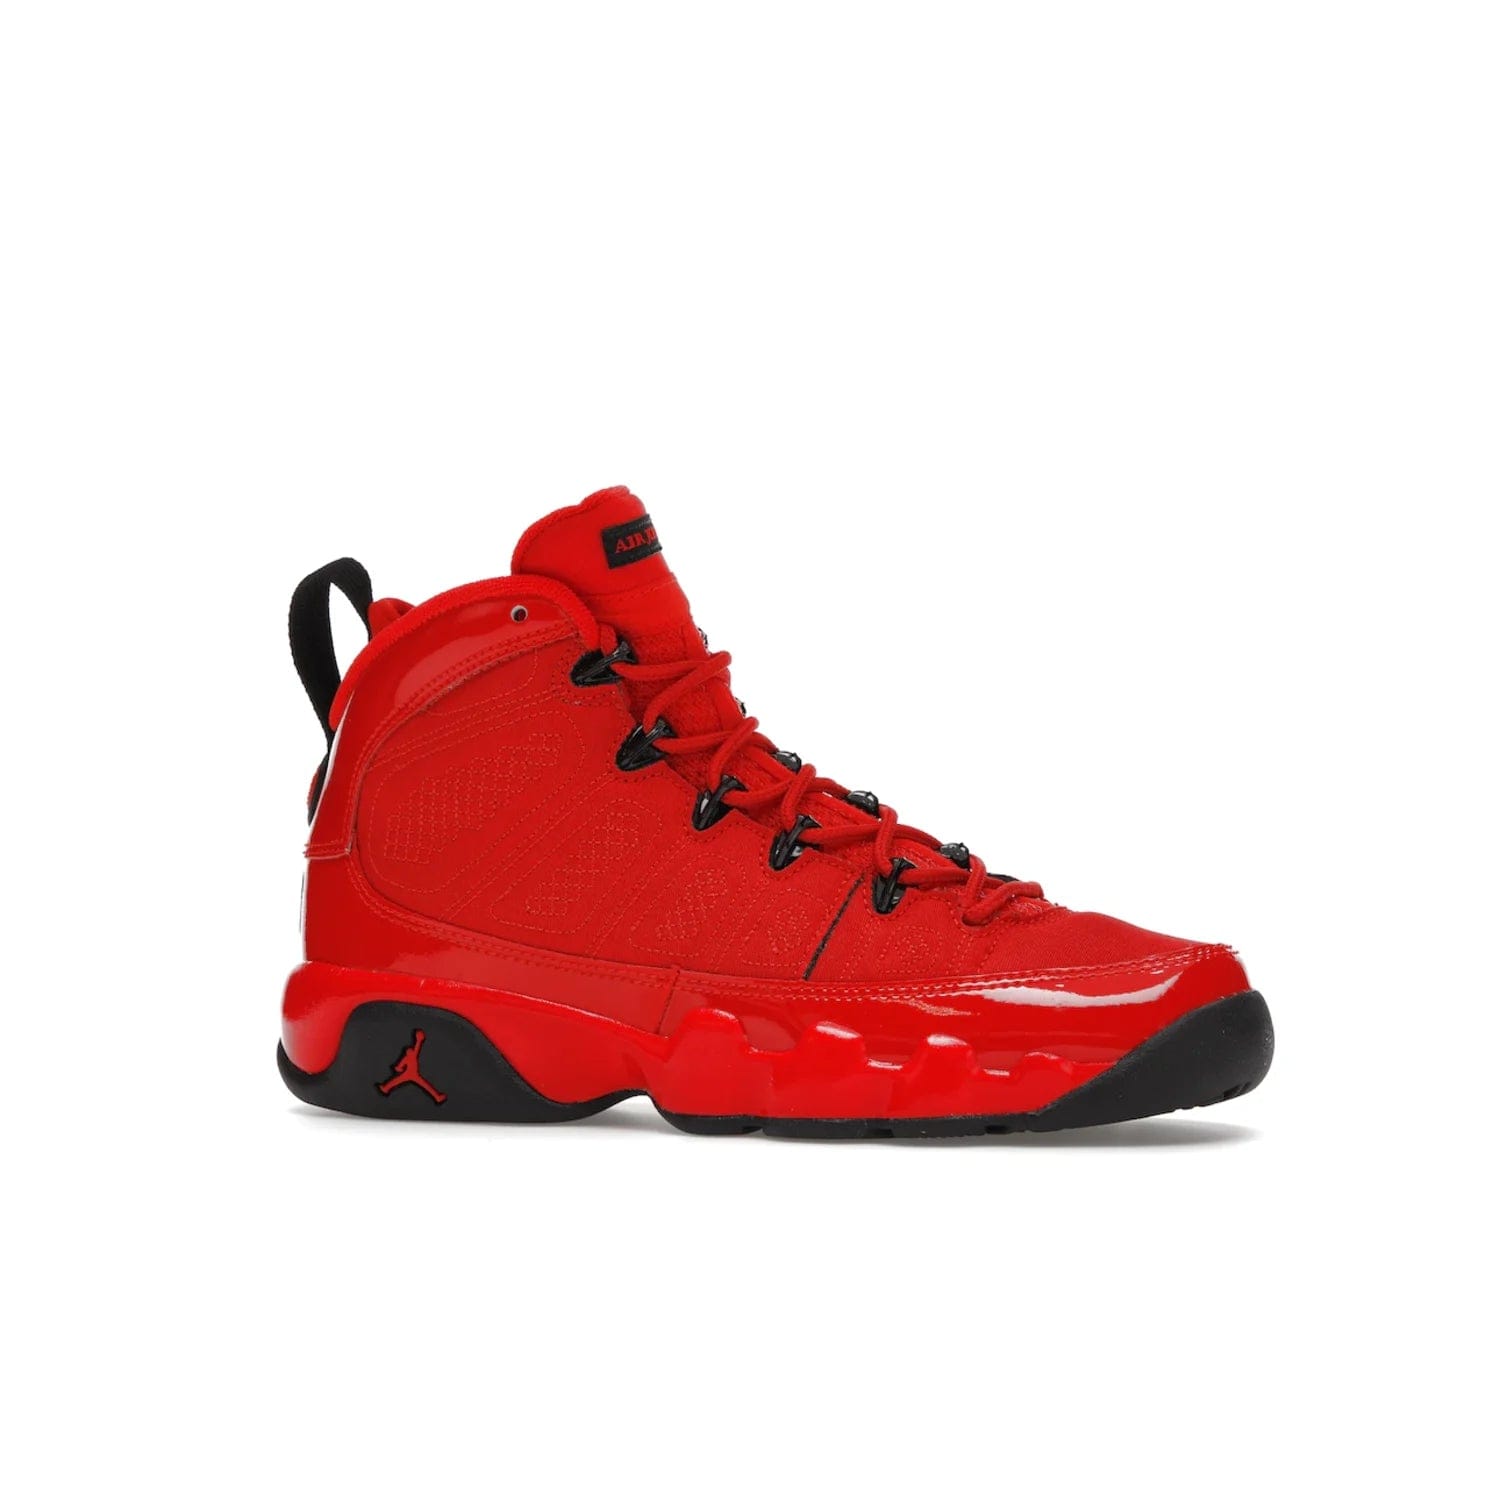 Jordan 9 Retro Chile Red (GS) - Image 3 - Only at www.BallersClubKickz.com - Introducing the Air Jordan 9 Retro Chile Red (GS), a vintage 1993 silhouette with fiery colorway. Features quilted side paneling, glossy patent leather, pull tabs, black contrast accents, and foam midsole. Launching May 2022 for $140.